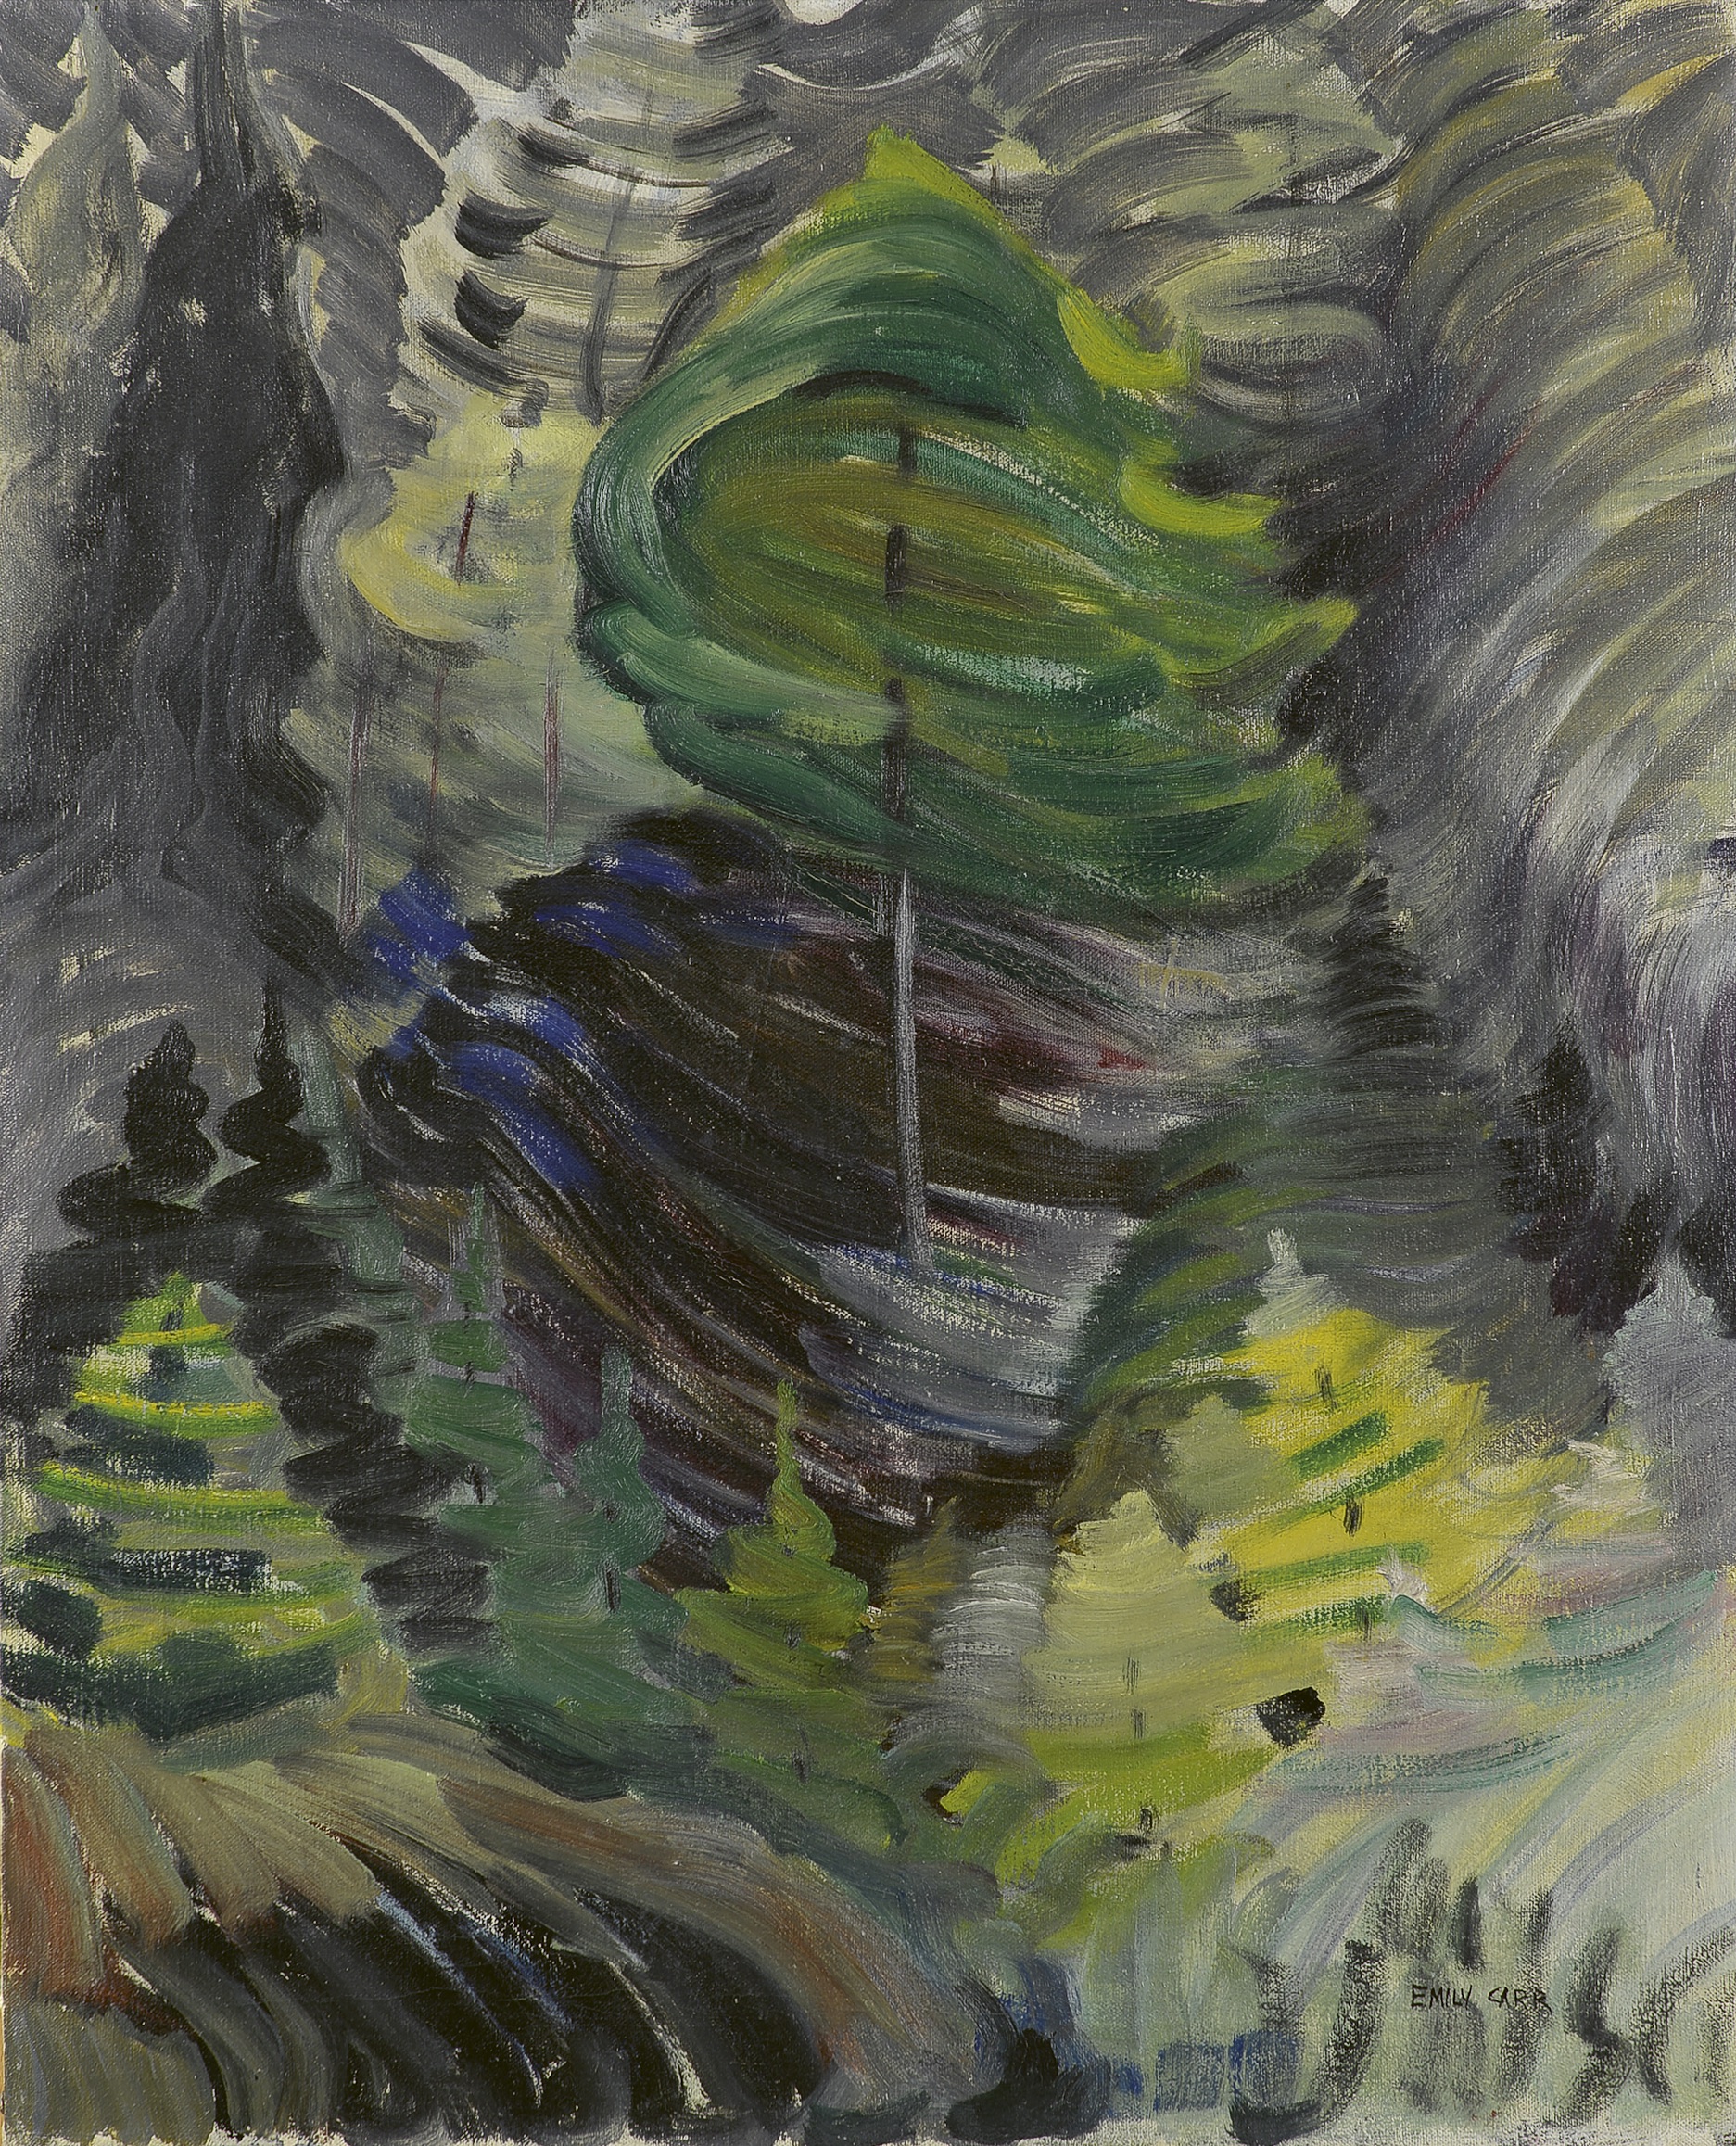 Emily Carr.  Juice of Life, 1938–39. Oil on canvas . Collection of the Art Gallery of Greater Victoria, Gift of Dr. Ethlyn Trapp, Vancouver. Photo: Stephen Topfer, Art Gallery of Greater Victoria.